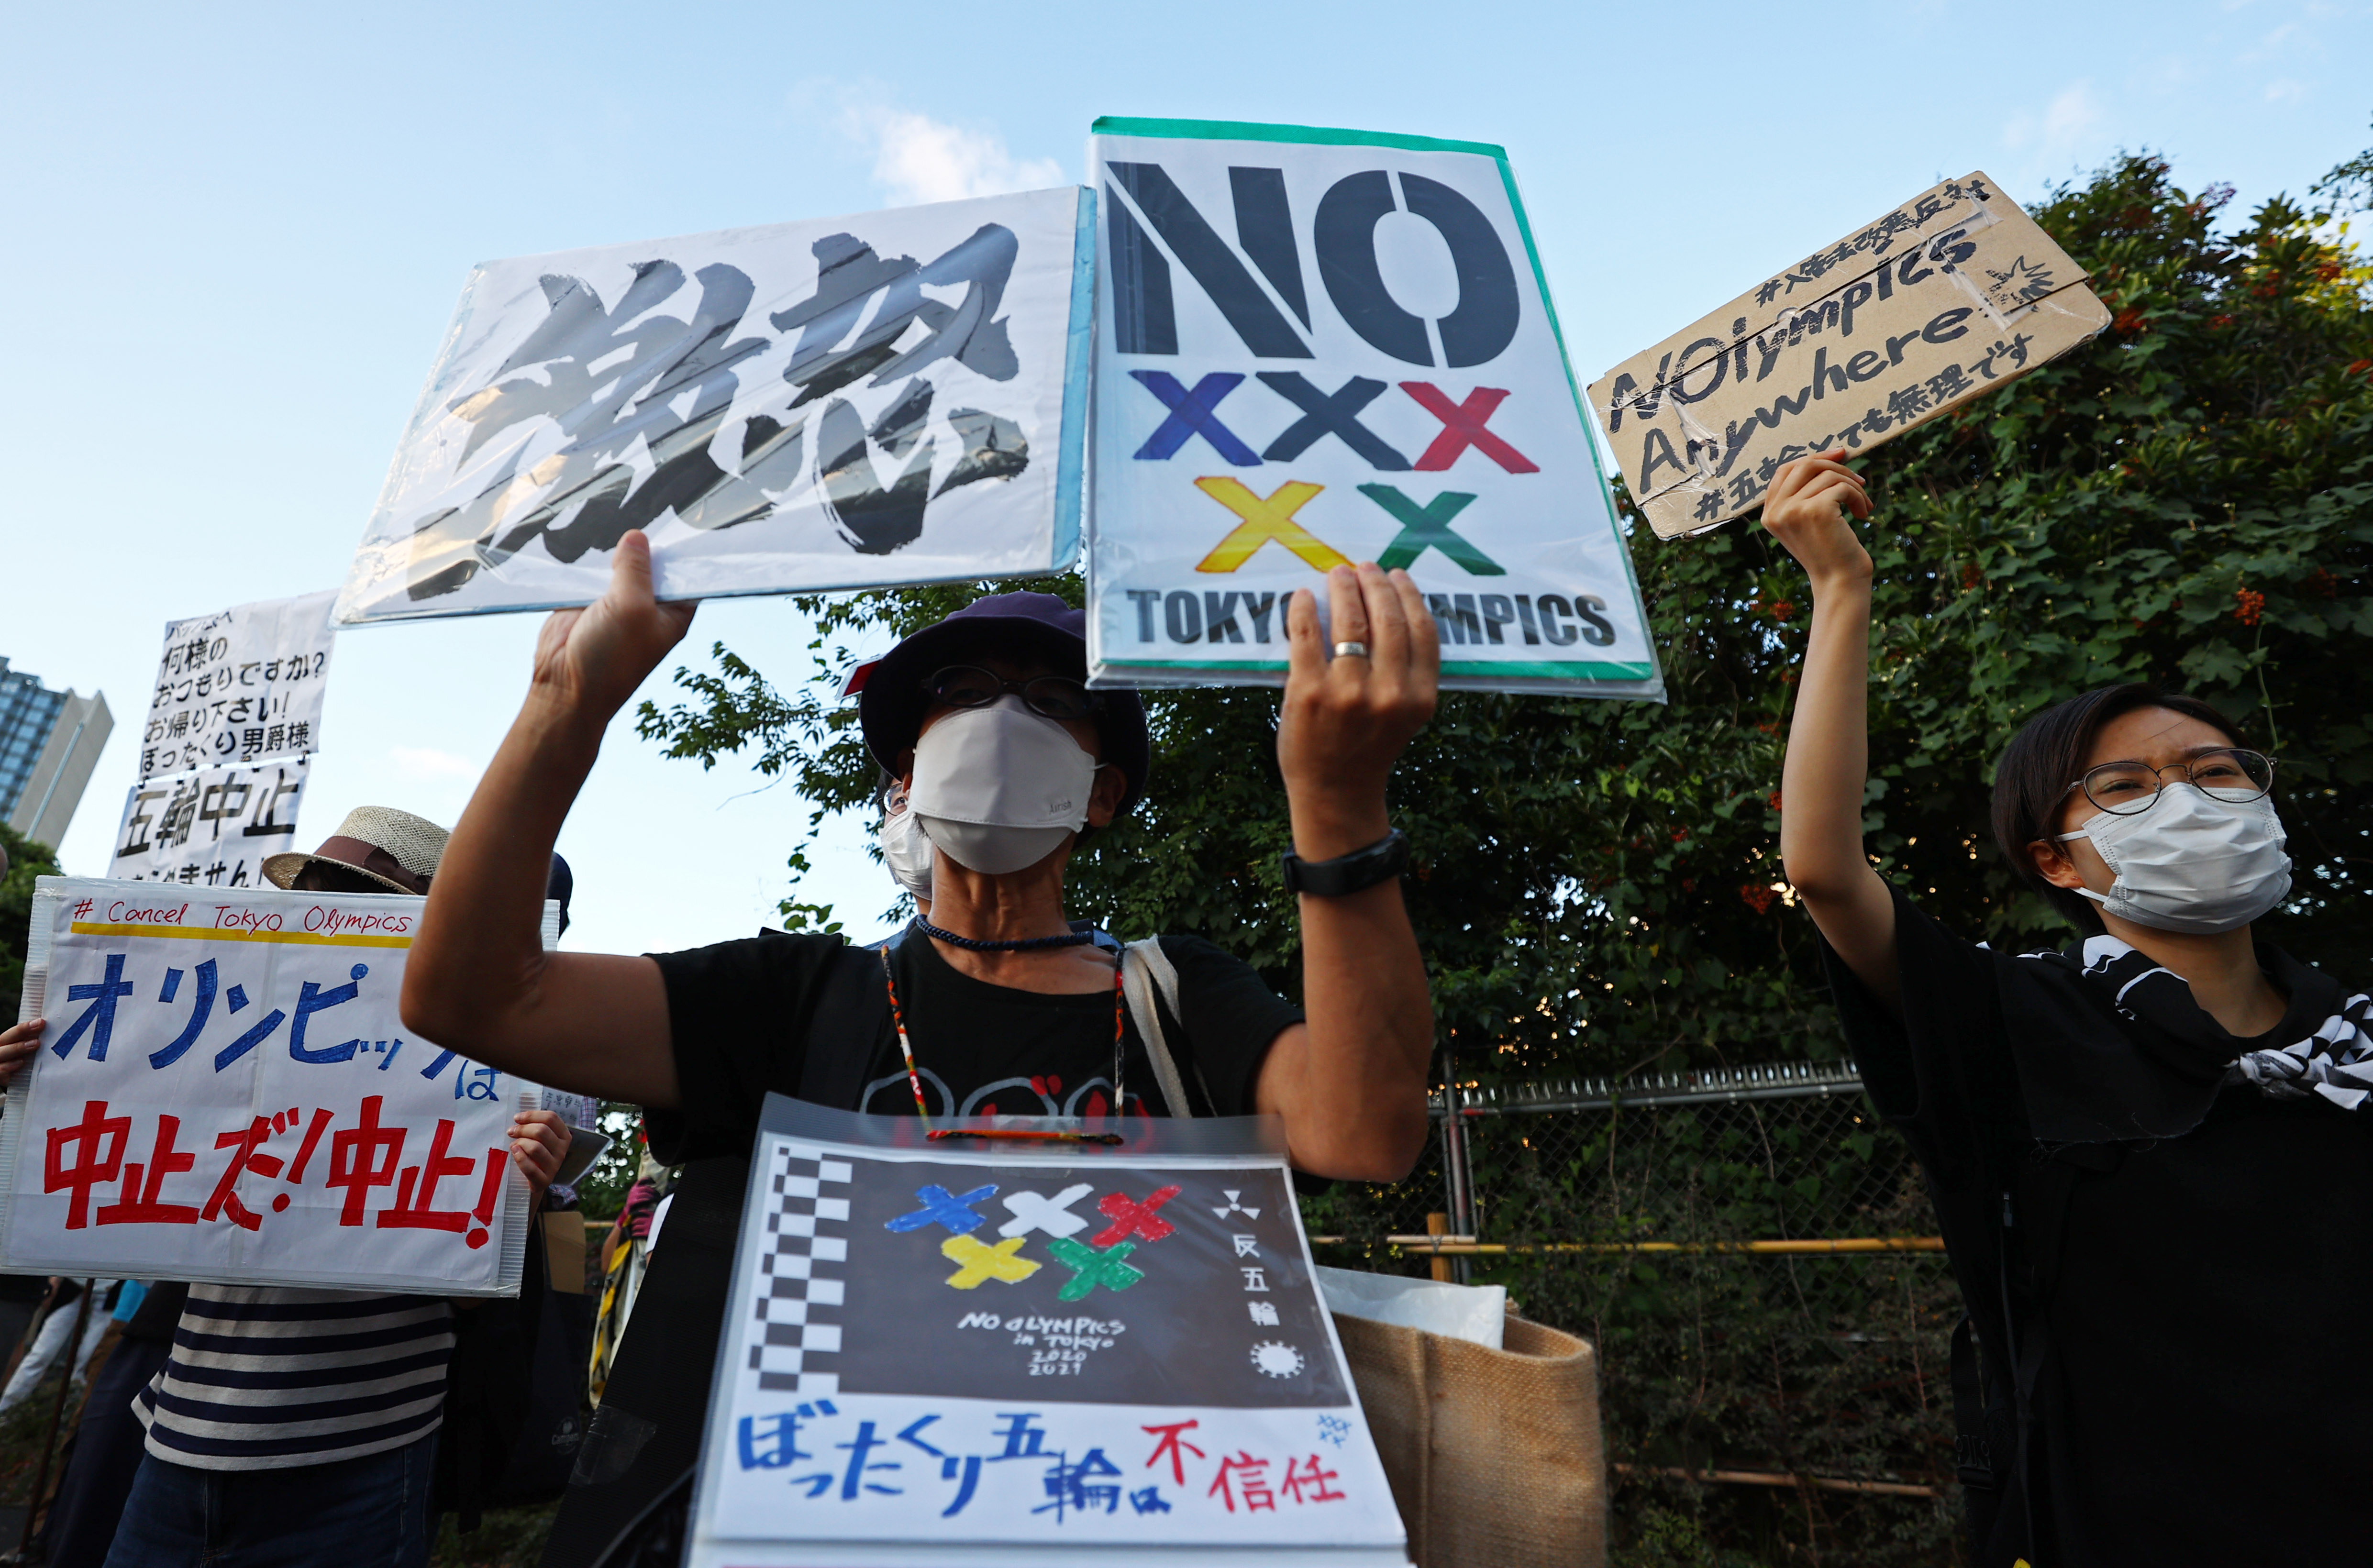 People protest against the Tokyo 2020 Olympic Games